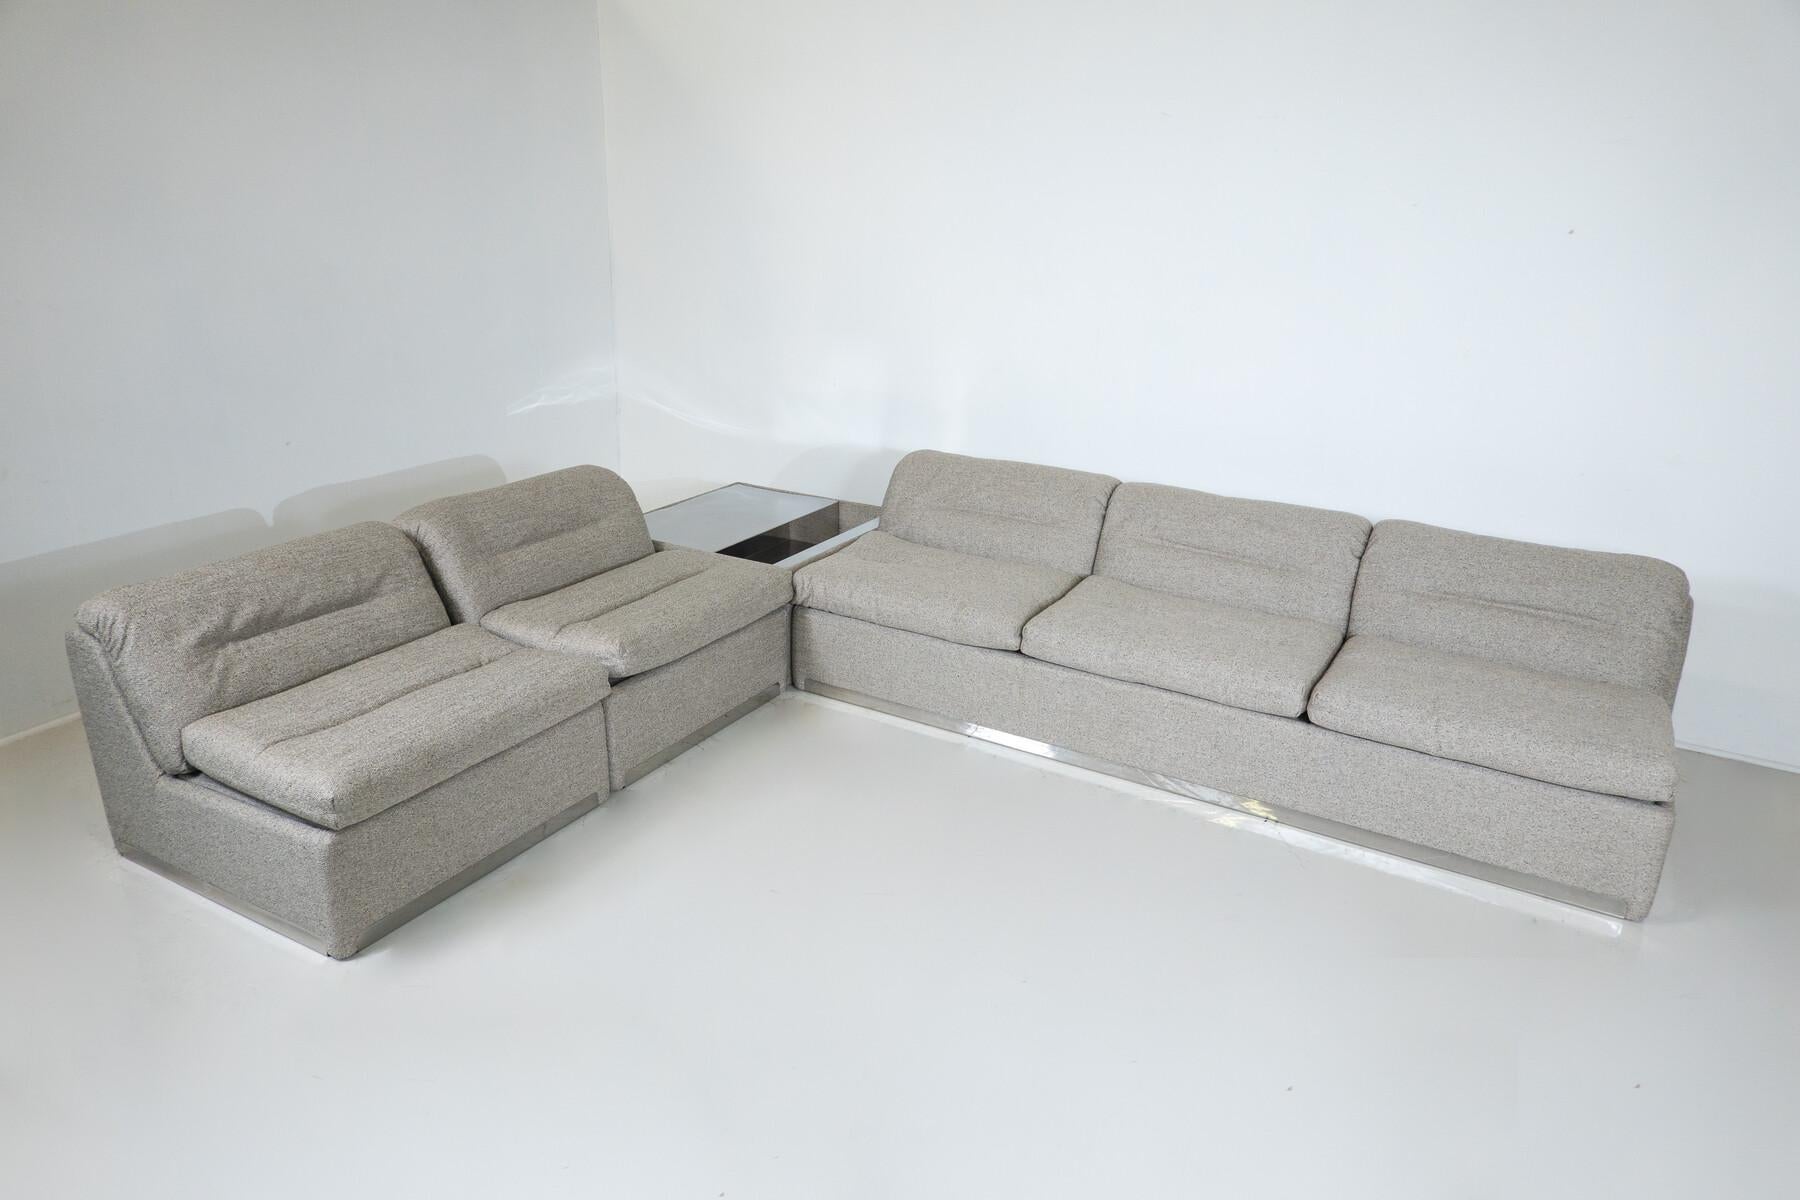 P10 Proposals Modular Sofa by Giovanni Offredi for Saporiti, Italy, 1970s - New Upholstery